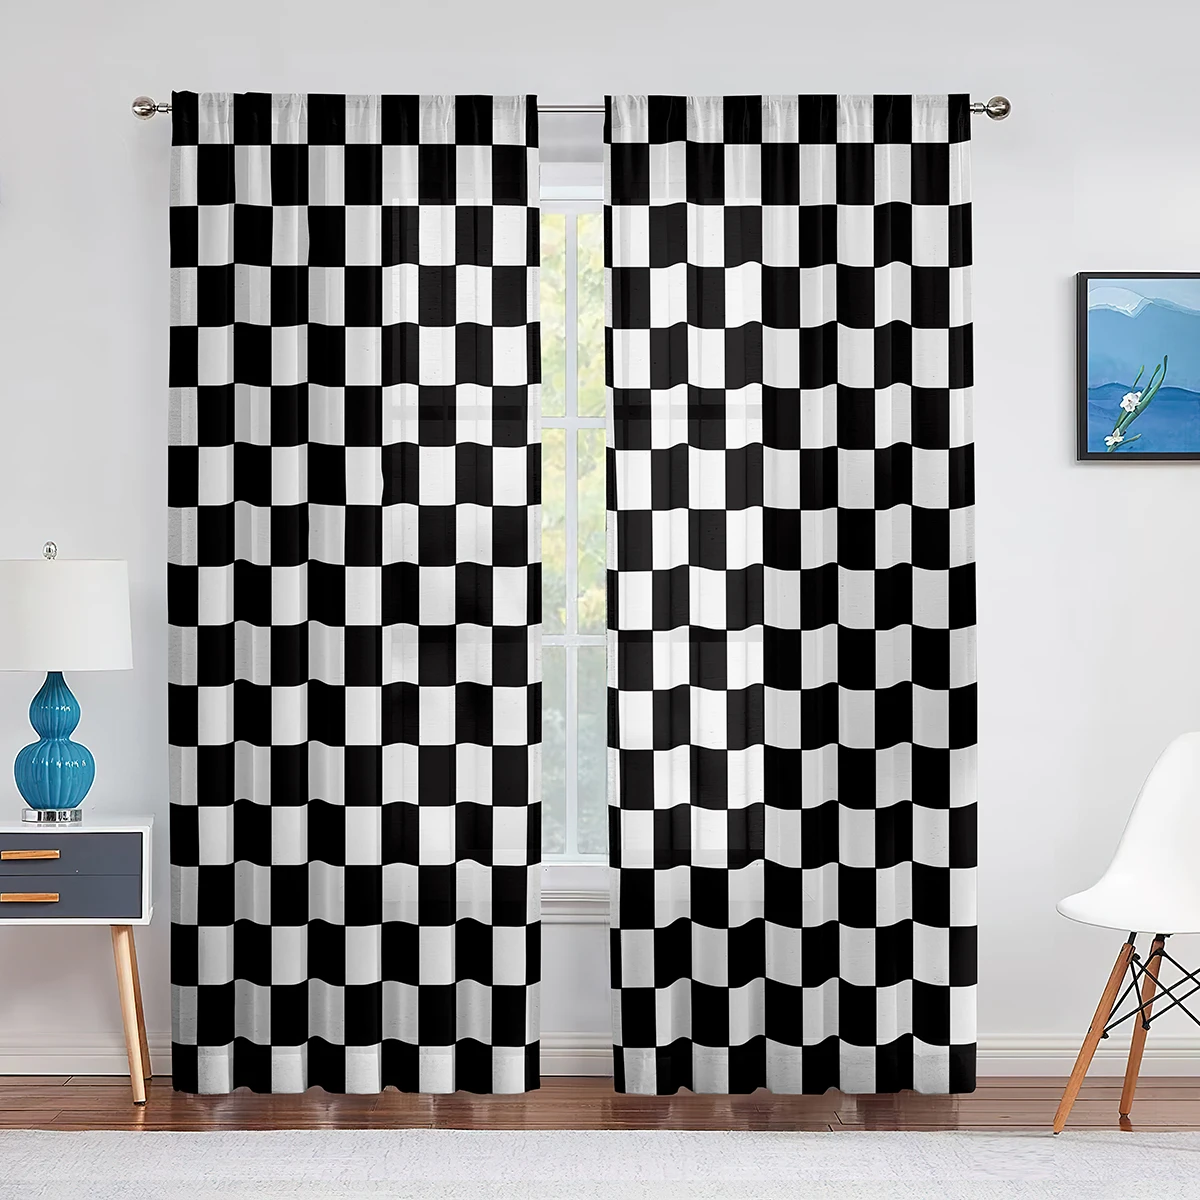 Black and White Checkered Sheer Voile Curtain for Living Room Bedroom Kitchen Decorations Race Car Flag Window Tulle Curtains